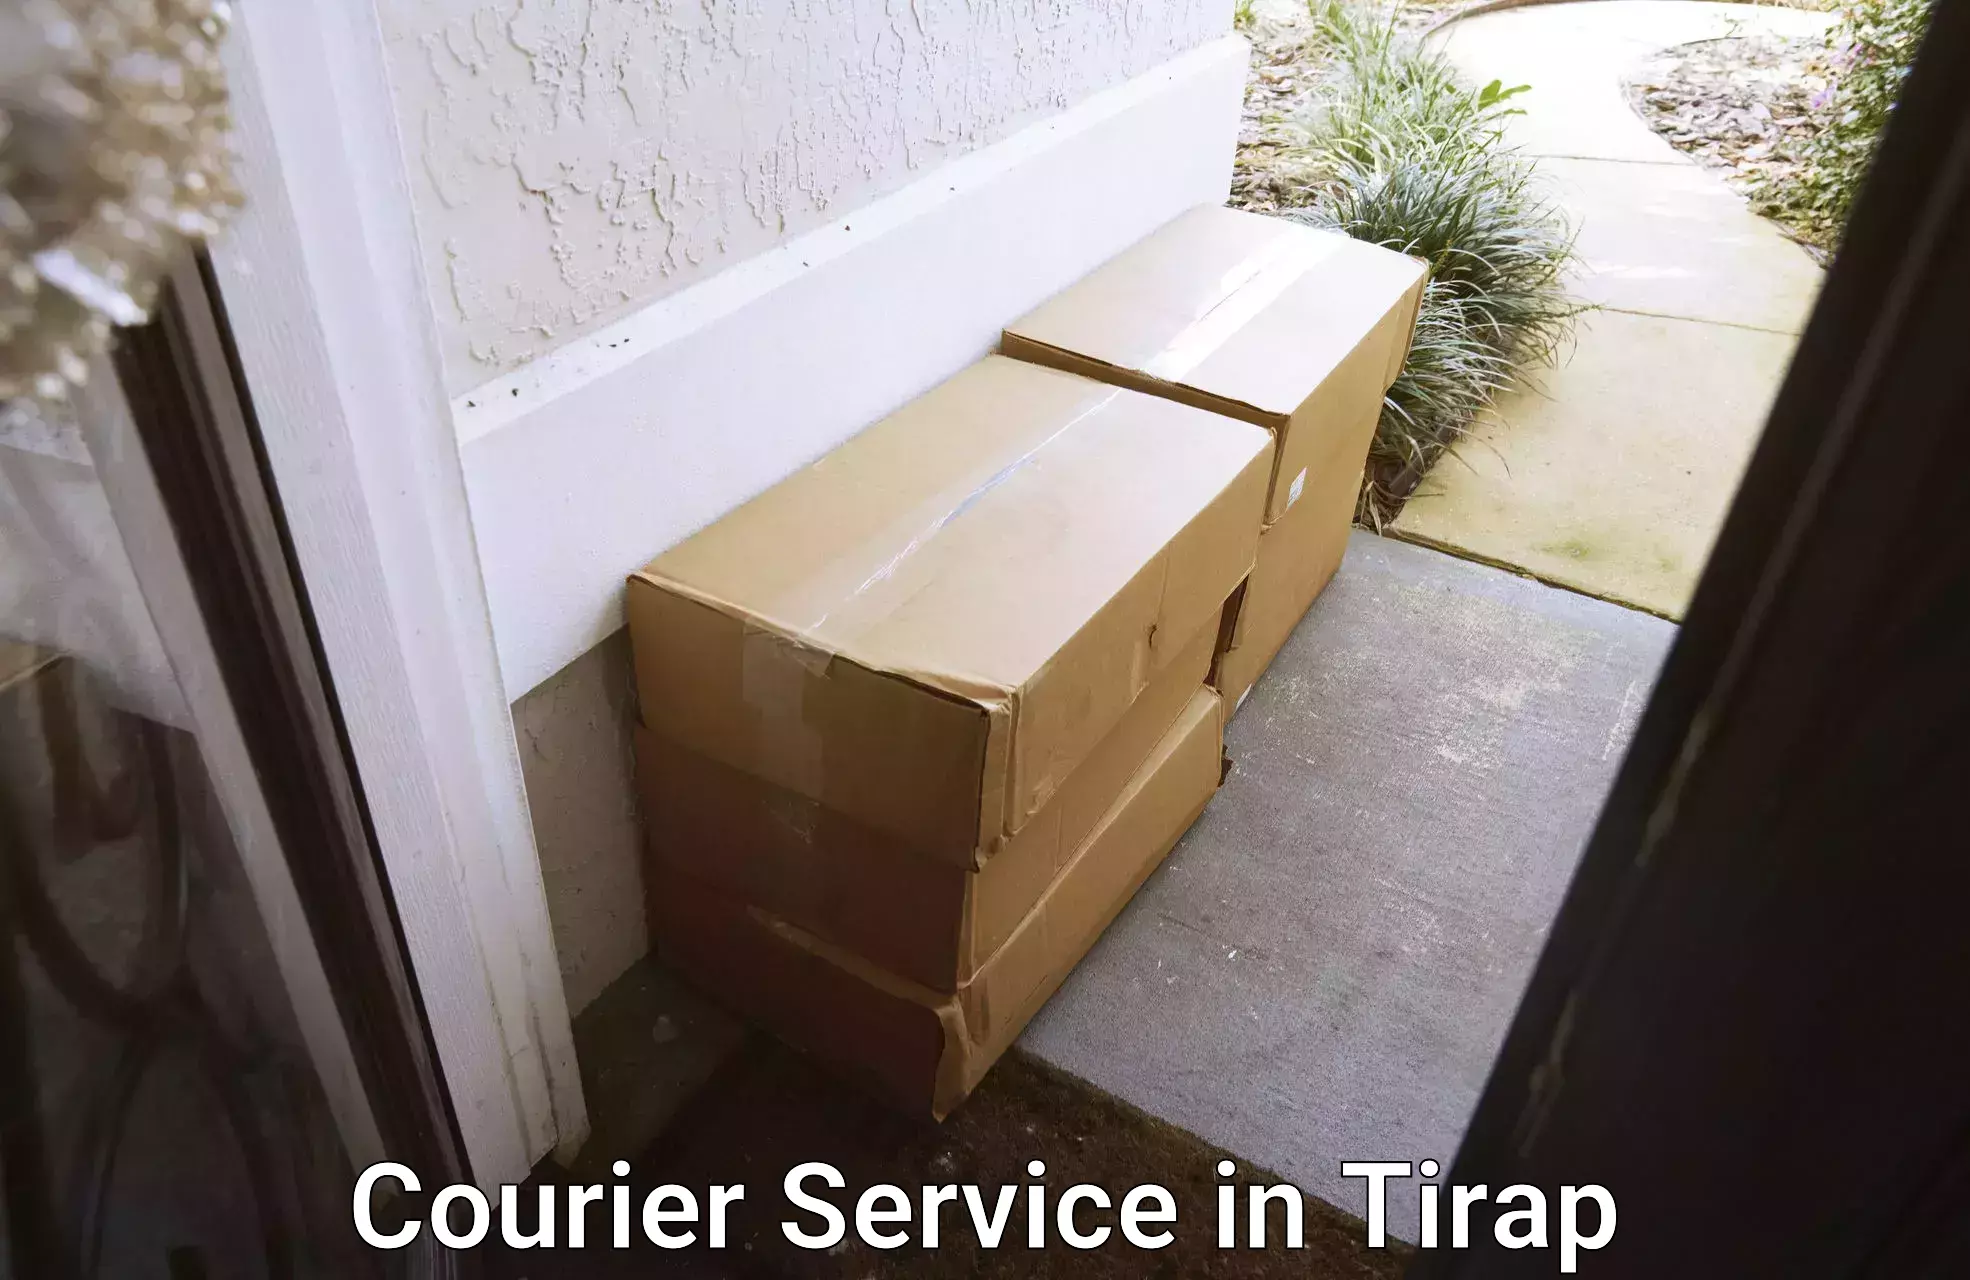 Local courier options in Tirap